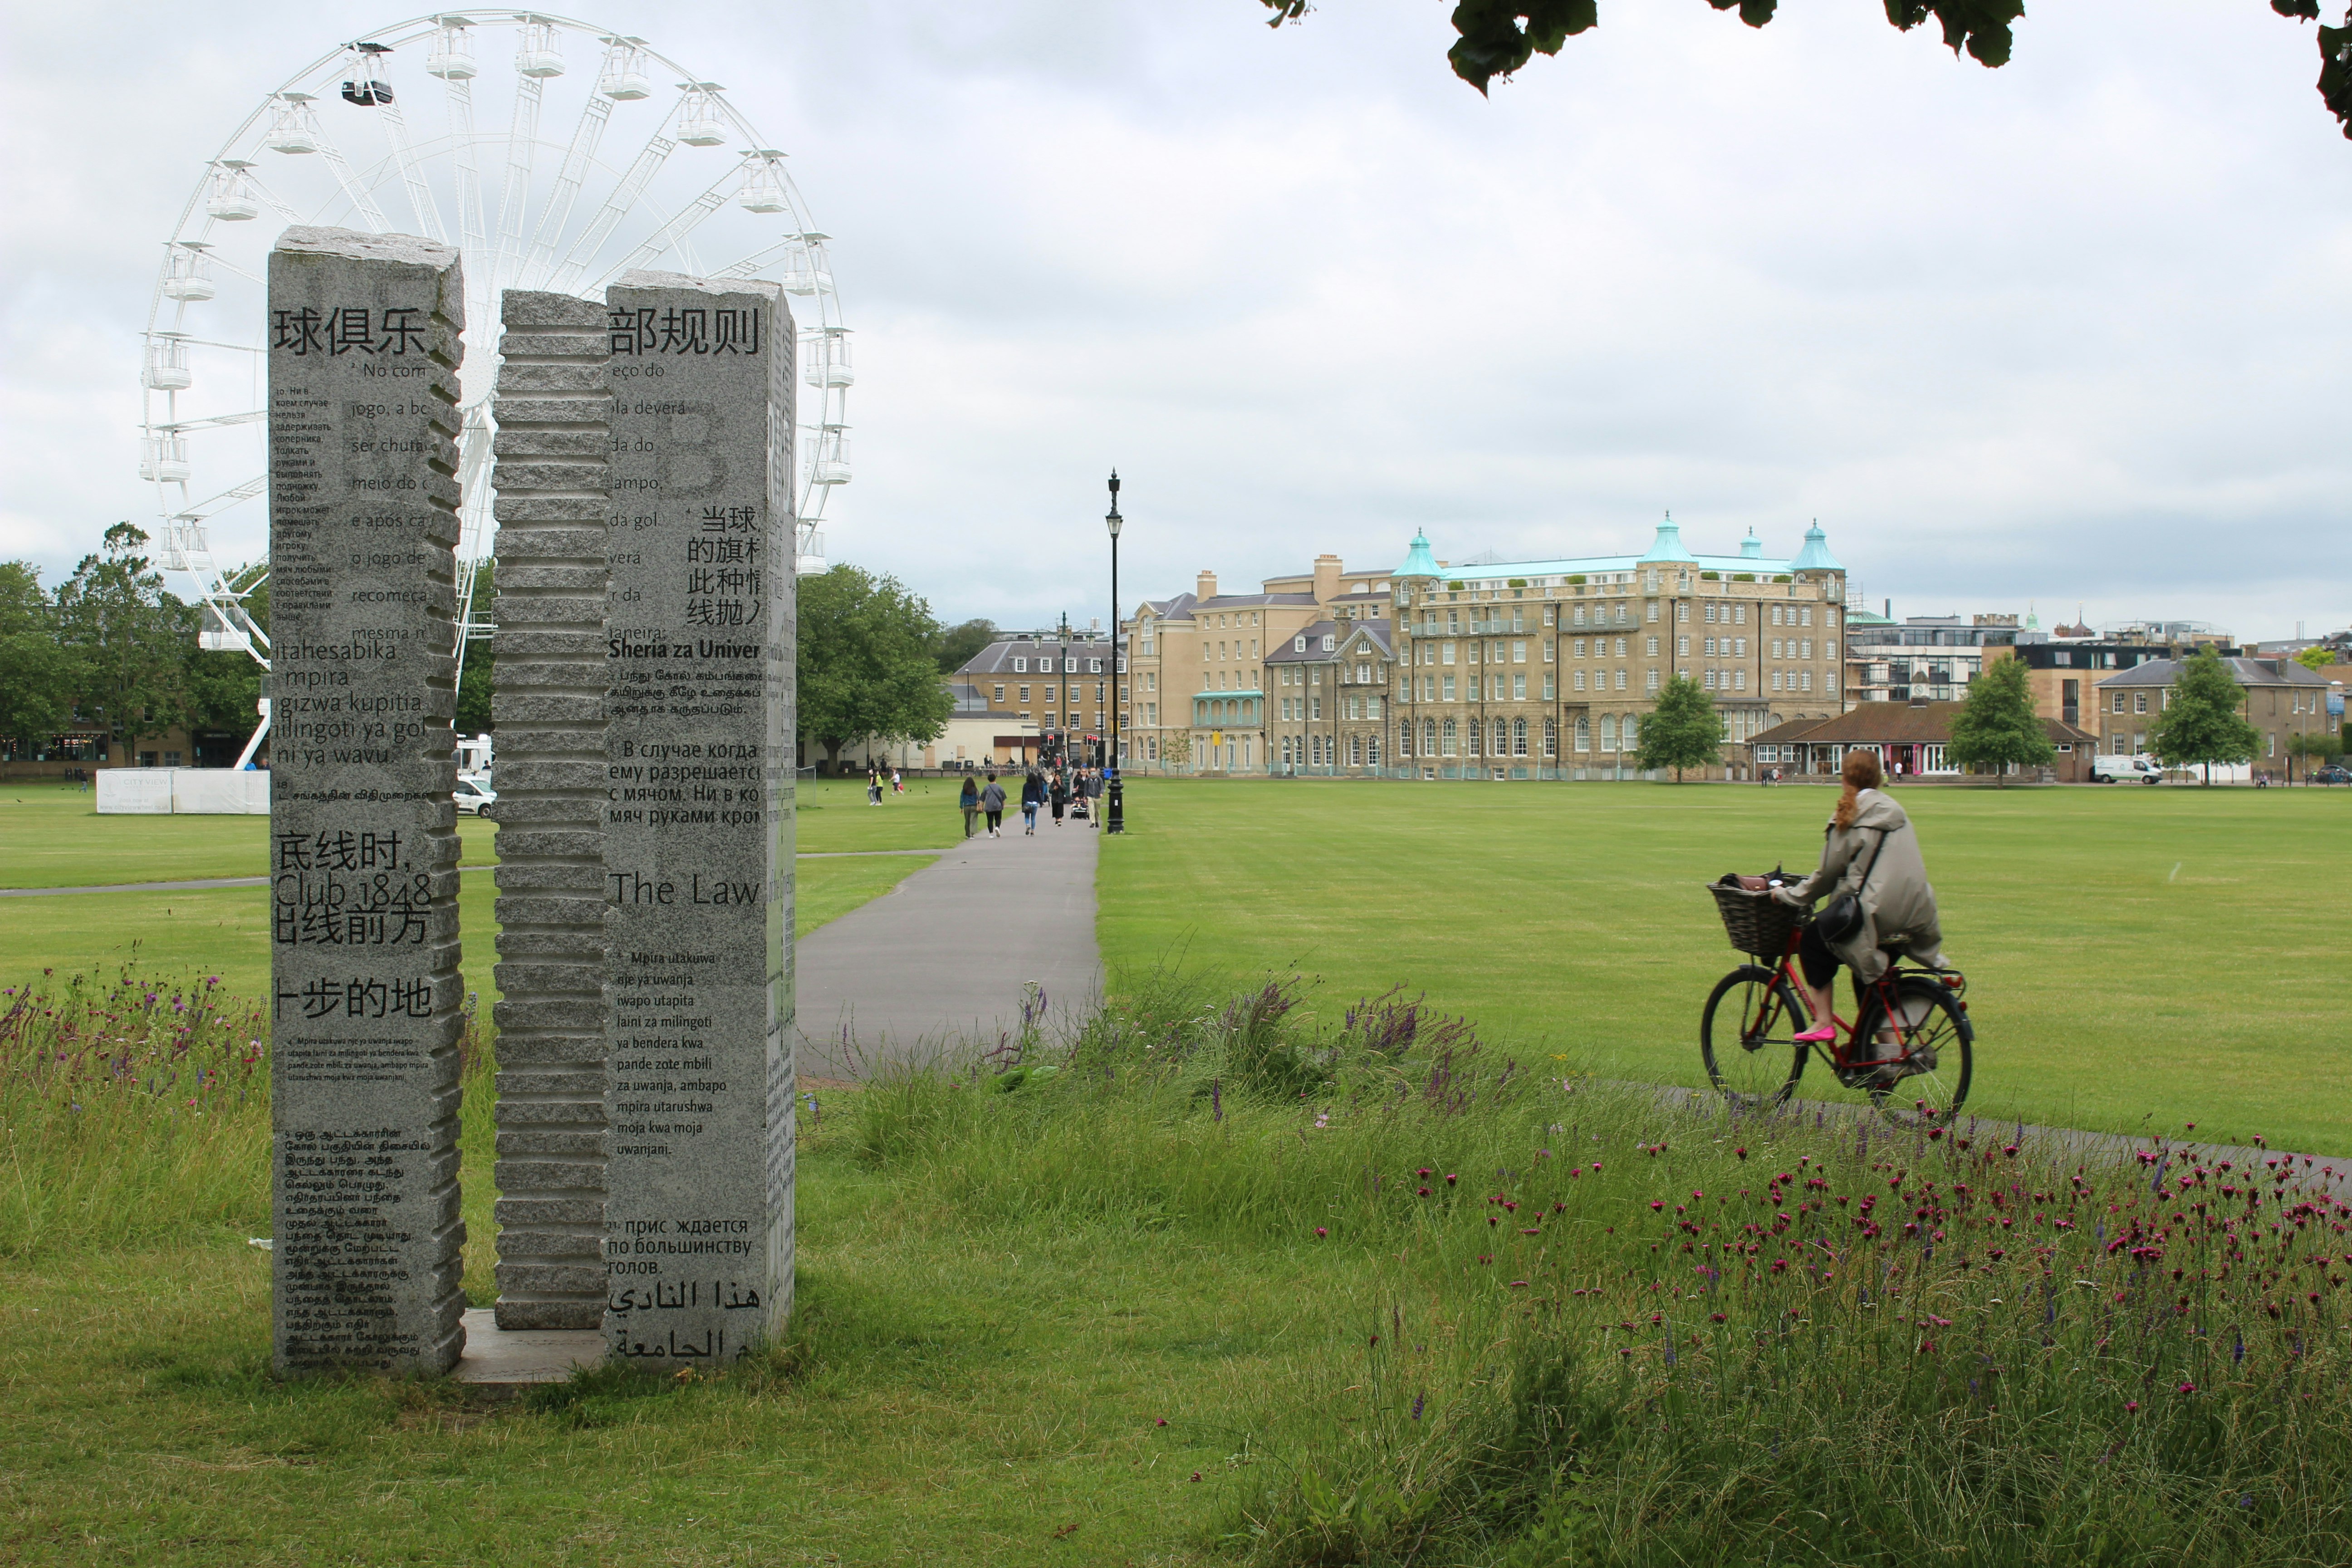 Stone marker commemorating the 1848 Cambridge Rules of football on Parker's Piece, Cambridge, UK.